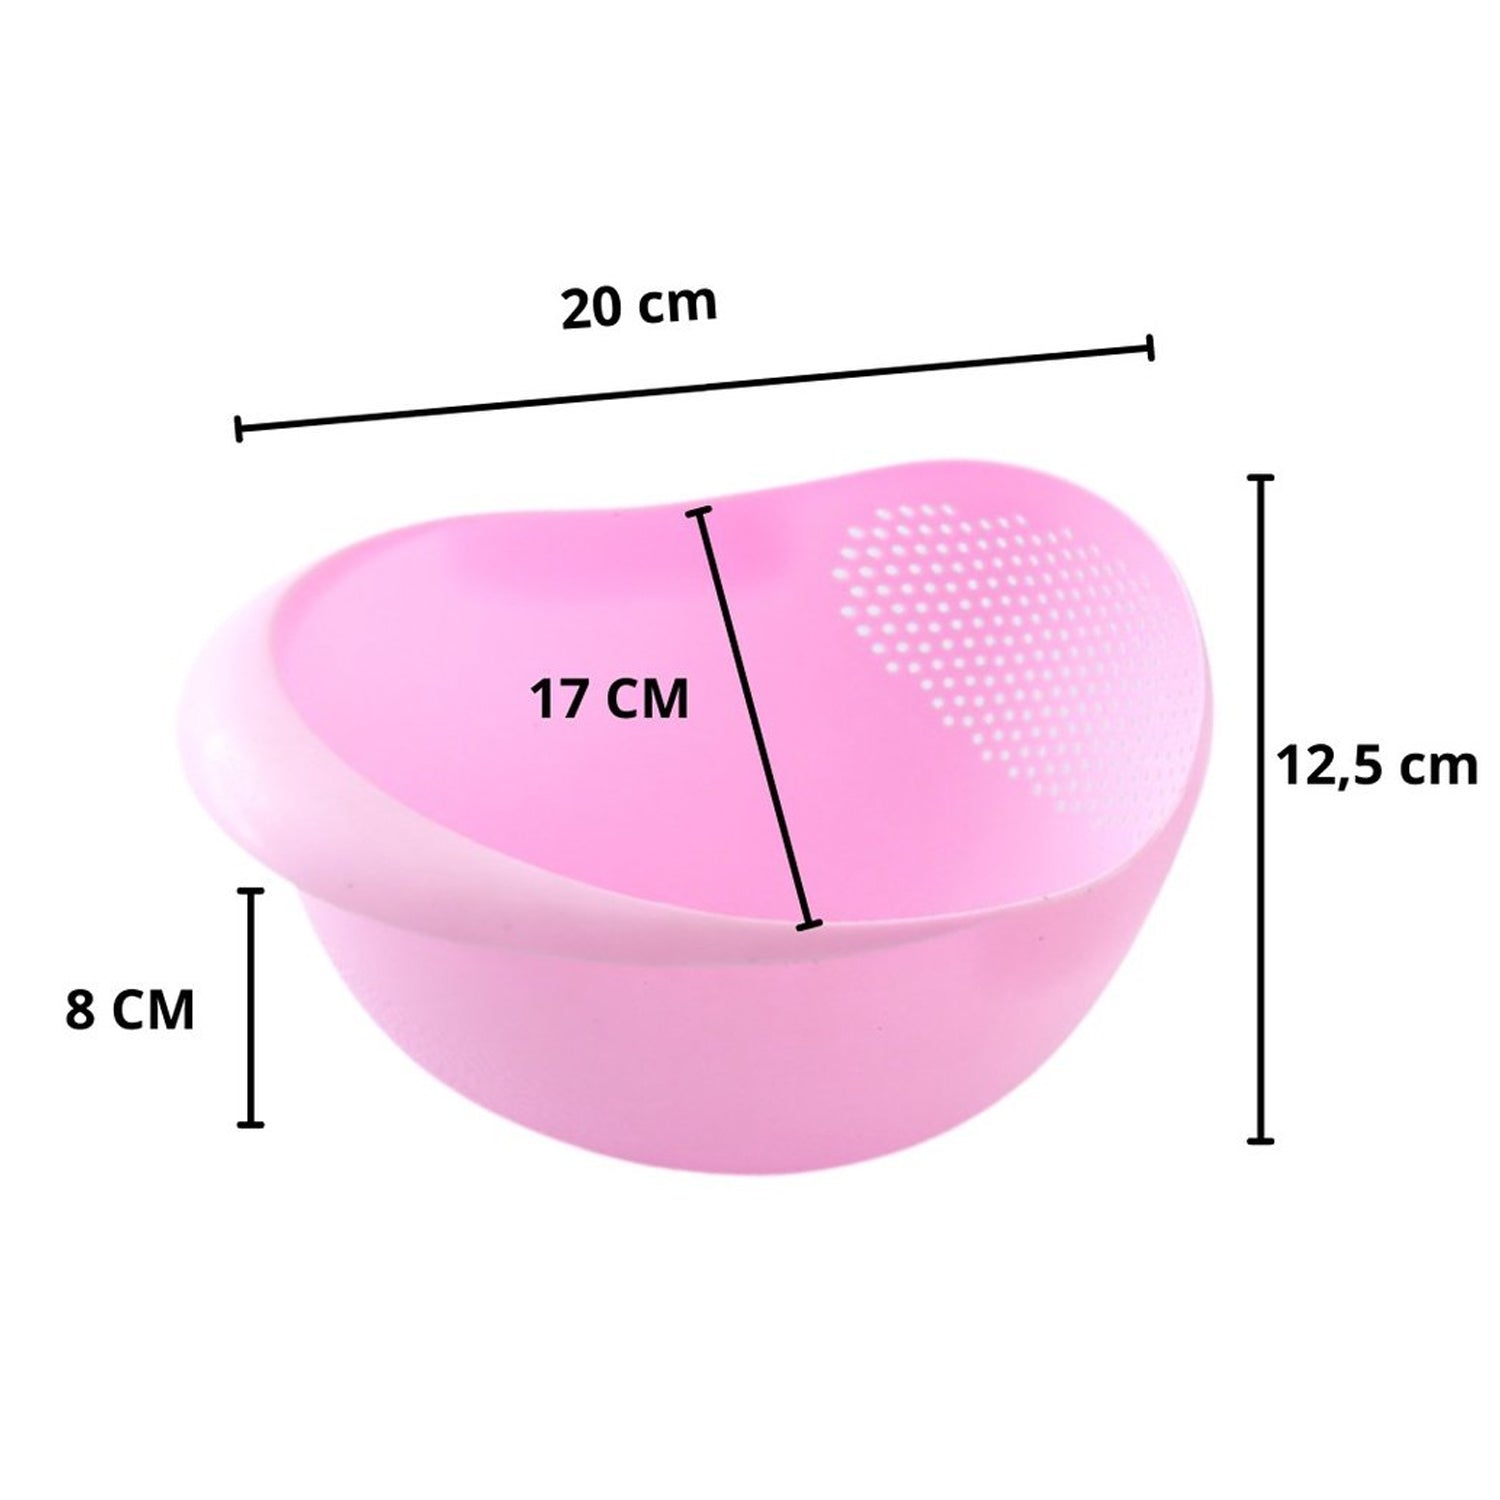 108 Kitchen Plastic big Rice Bowl Strainer Perfect Size for Storing and Straining DeoDap